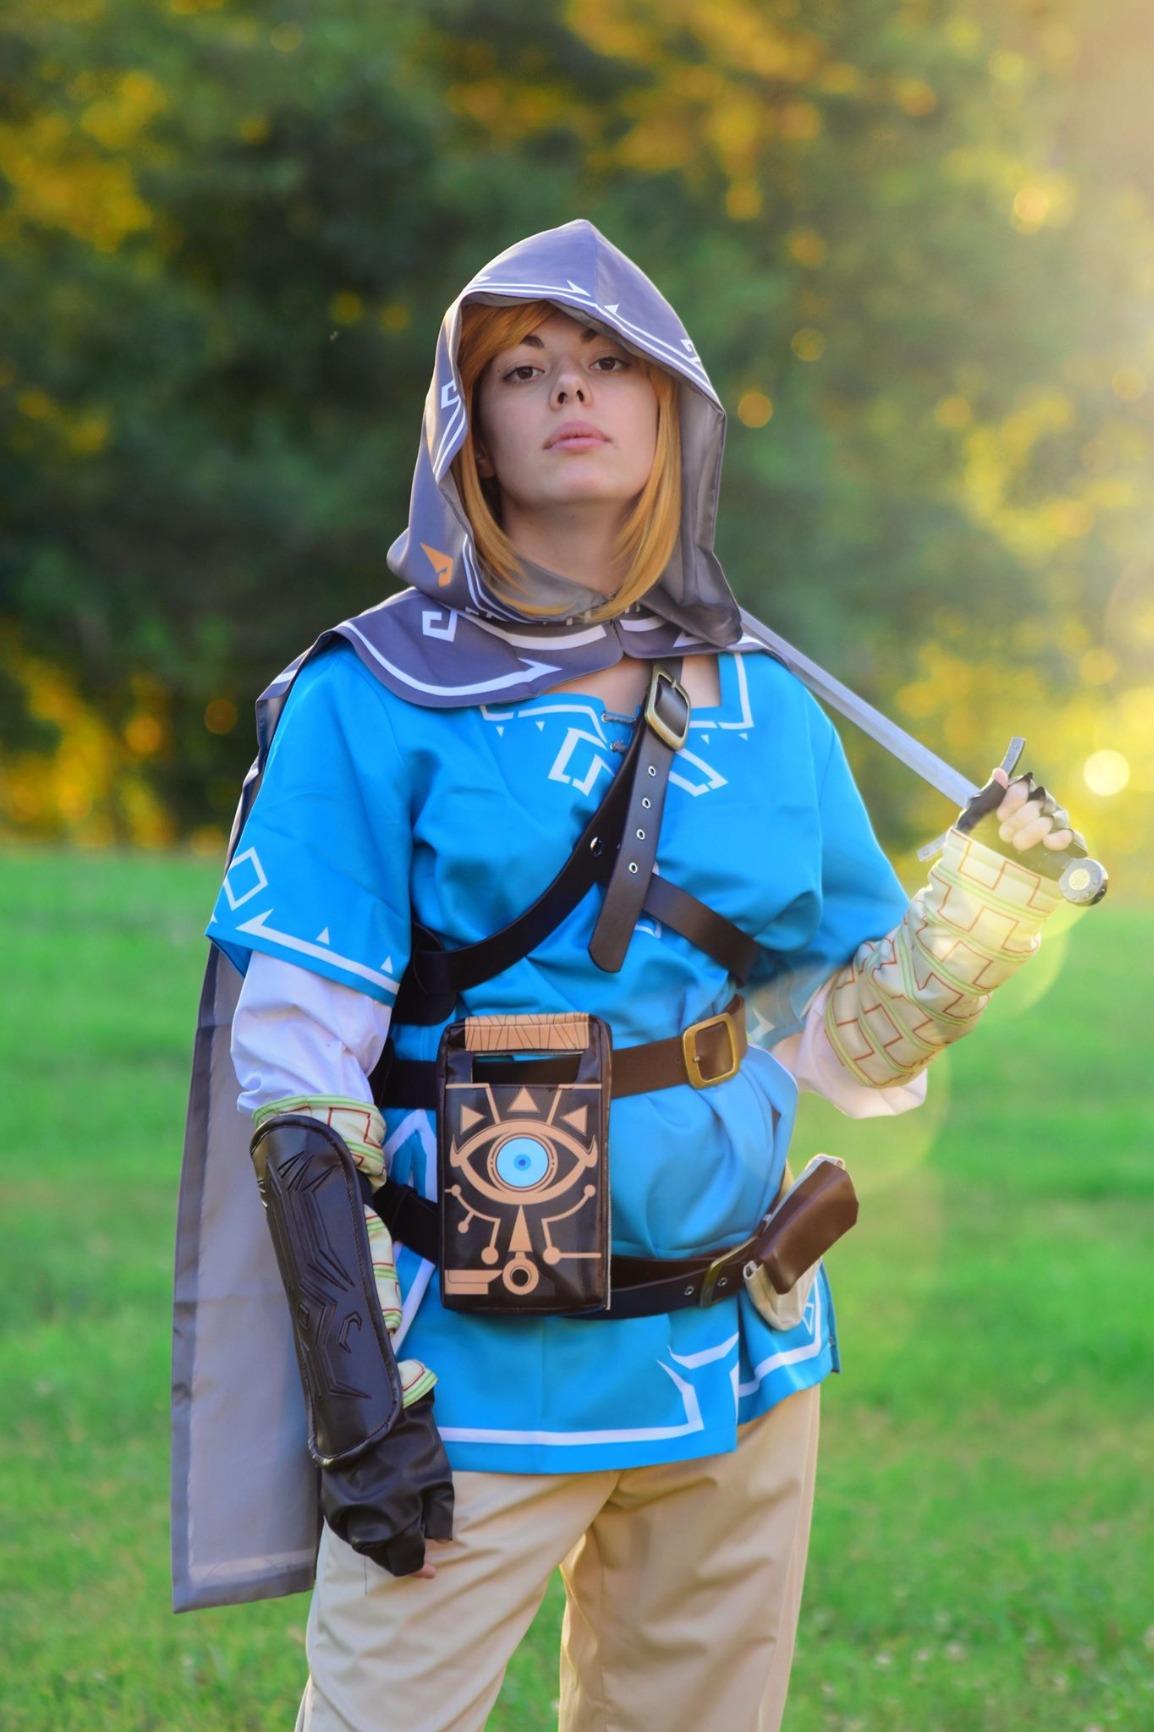 The Legend of Zelda Breath of the Wild Link Blue Tunic Cosplay Costume 3736